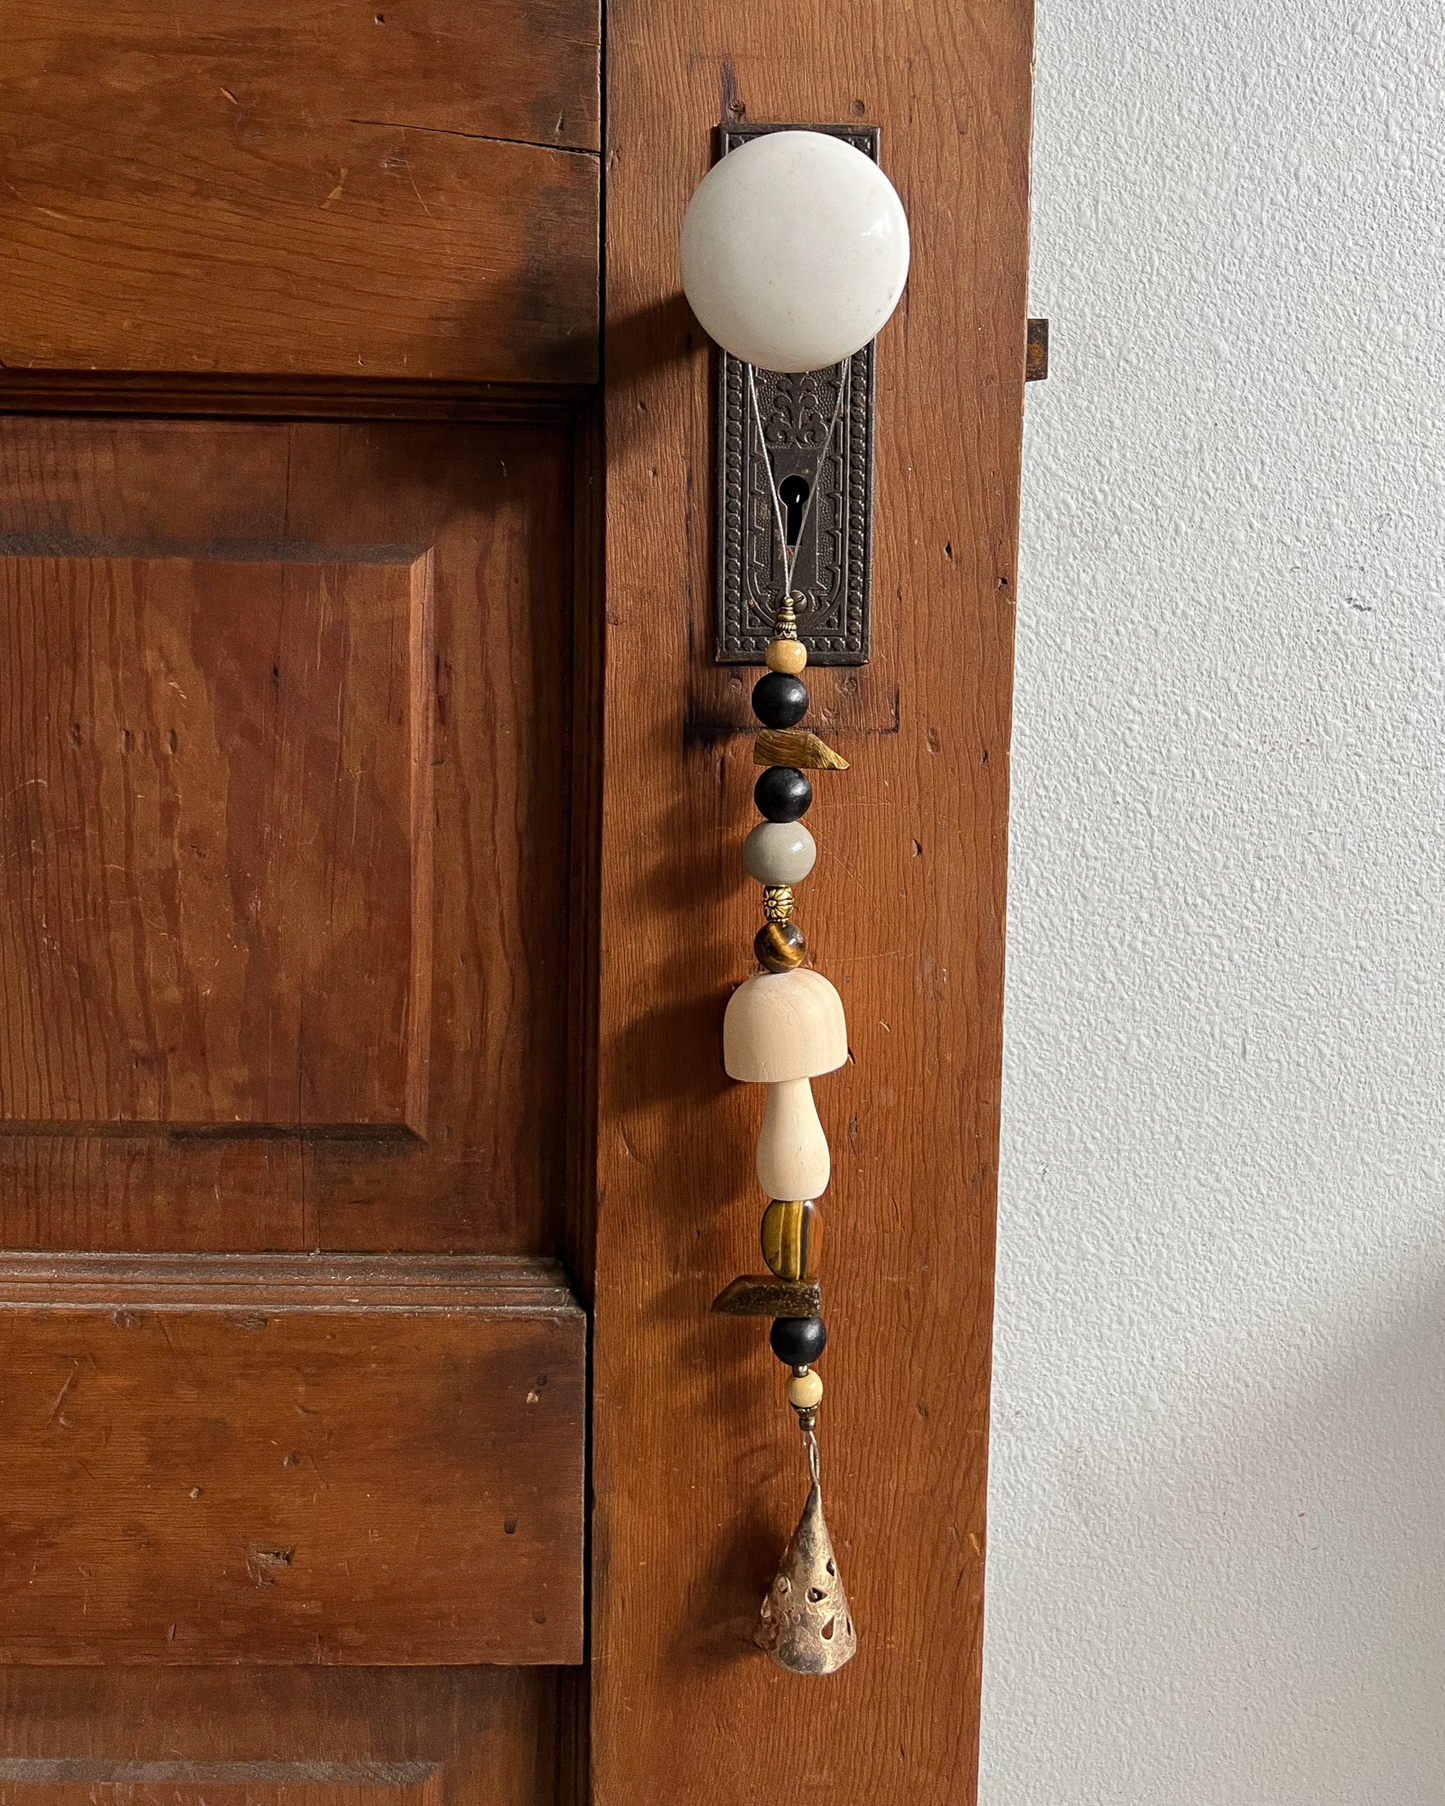 Single strand of wooden beads, tigers eye crystals, and a golden bell hang from an antique doorknob.